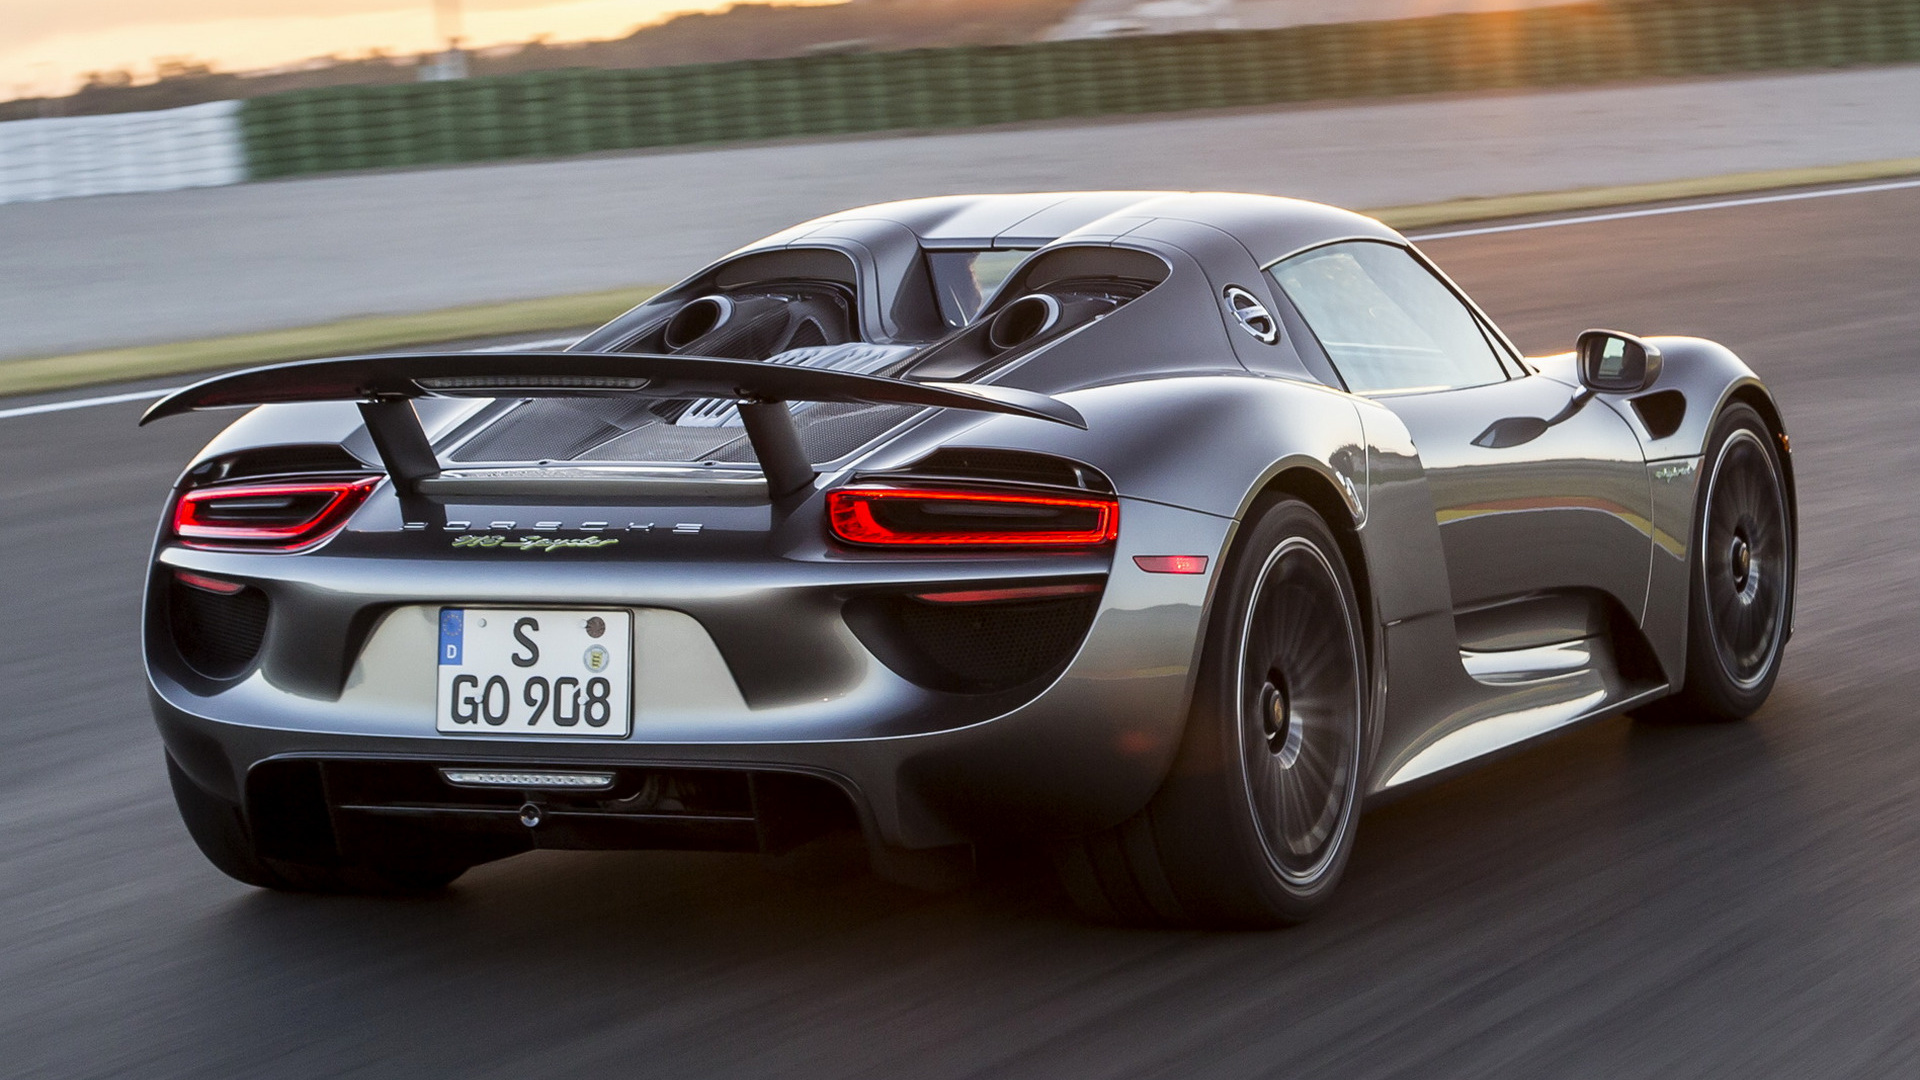 Porsche 918 Spyder (2014) US Wallpapers and HD Images ...